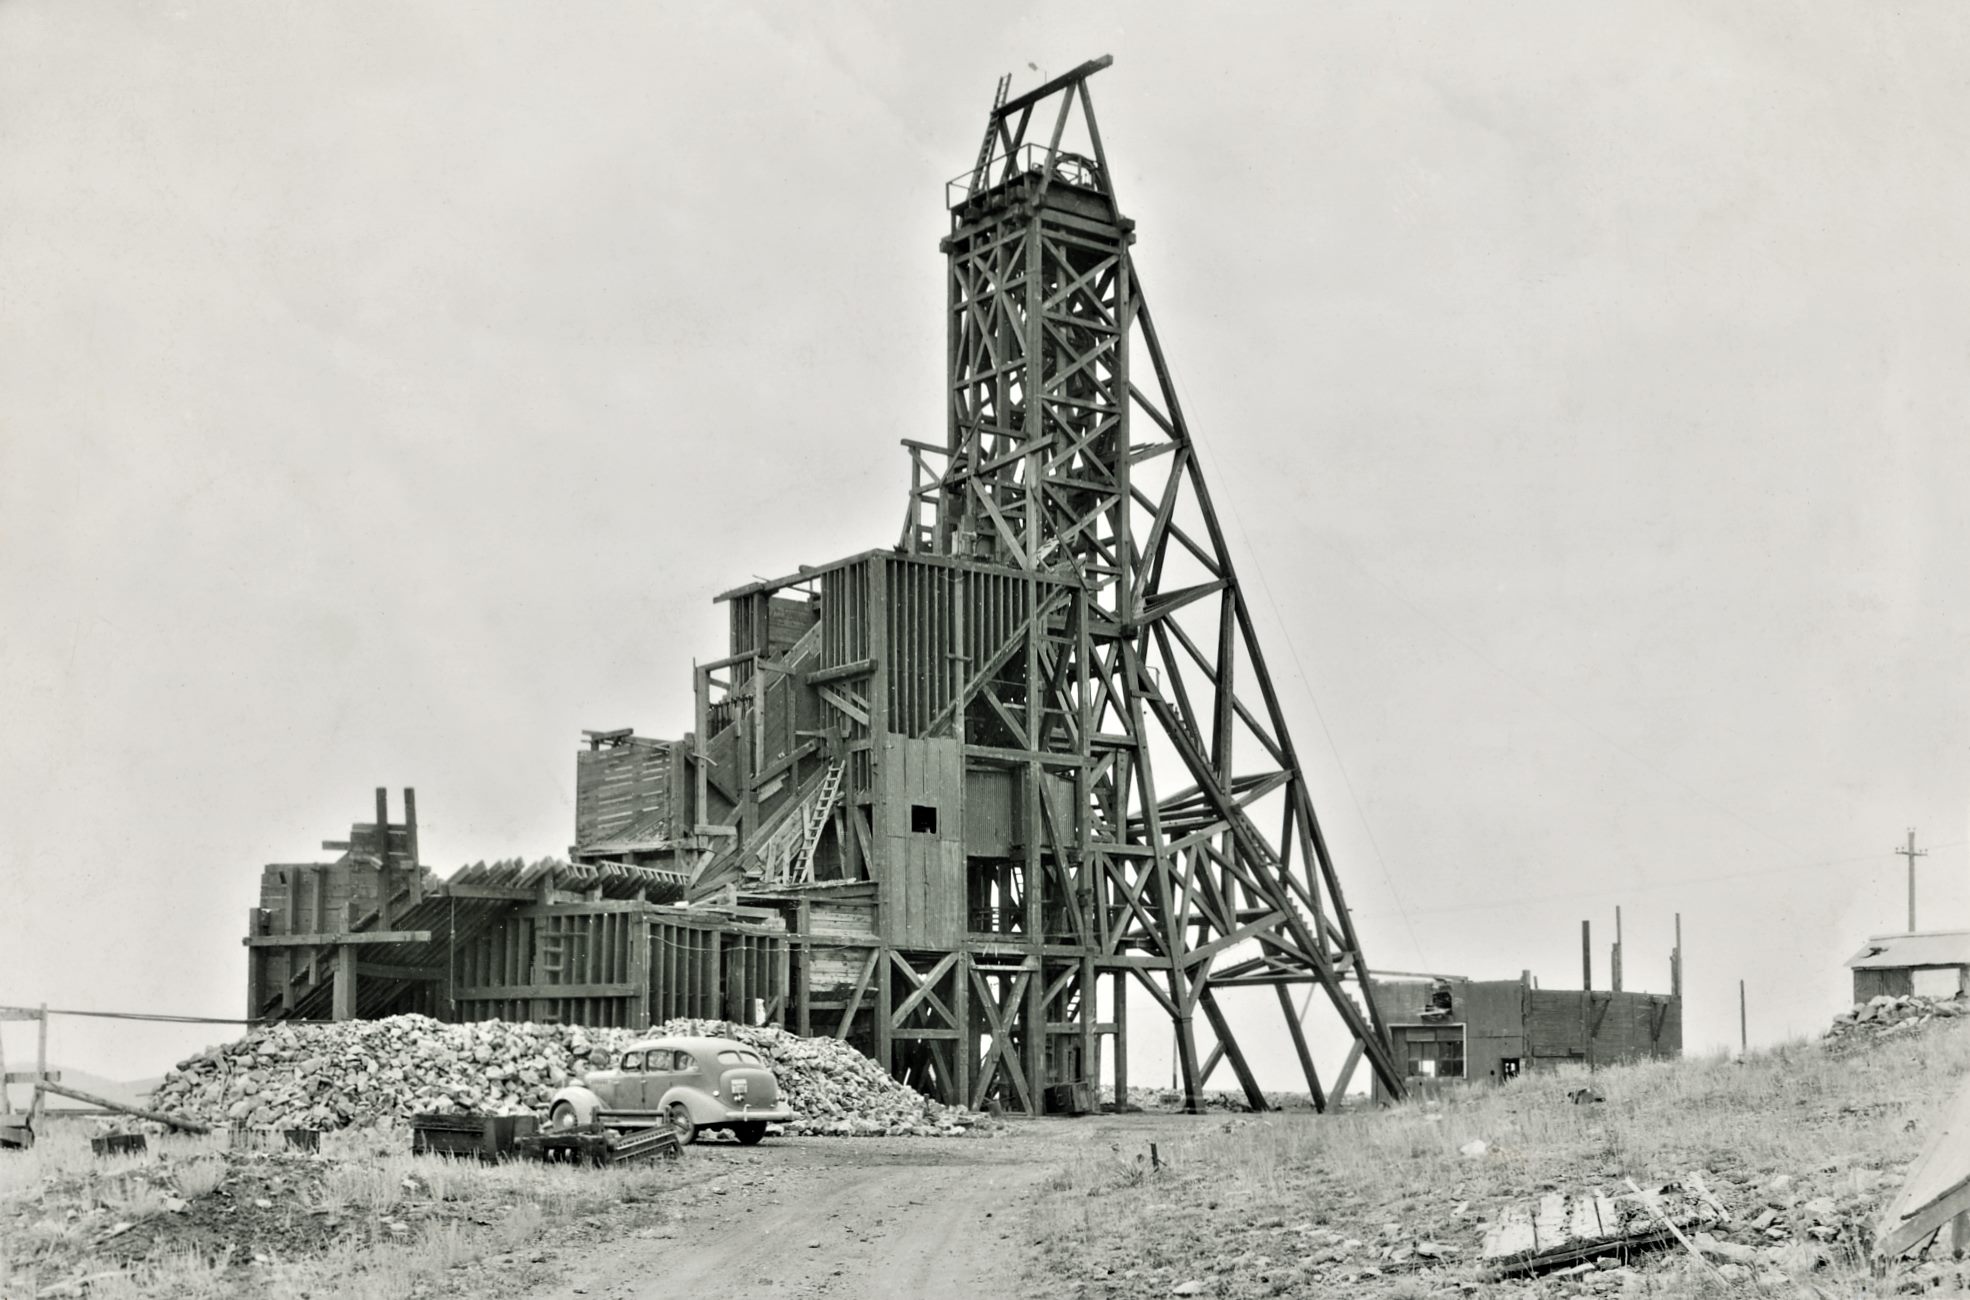 This somewhat enhanced view at the exposed Huge Head-Frame/Gallows-Frame of the old Stratton Independence Mine on Battle Mountain, outskirts of Victor, Colorado, show quite well how Huge the whole structure was! Dating this view is hard, I think it is from around 1940, but I do not know. There is a car parked below this mine structure, and that seems to have a License-plate of 43-660 but I can't tell what else it might have written above the numbers, so I can't date the image from that either…
   The whole structure is quite massive, and all in wood it appears! Hard to imagine all this at one time enclosed in a massive Shaft-house type of structure, as I assume this is as it was built inside the structure back in the days. The left most parts, with the various bins I do think is more recent then the headframe itself, but I dare not say anything as this is beyond my knowledge.